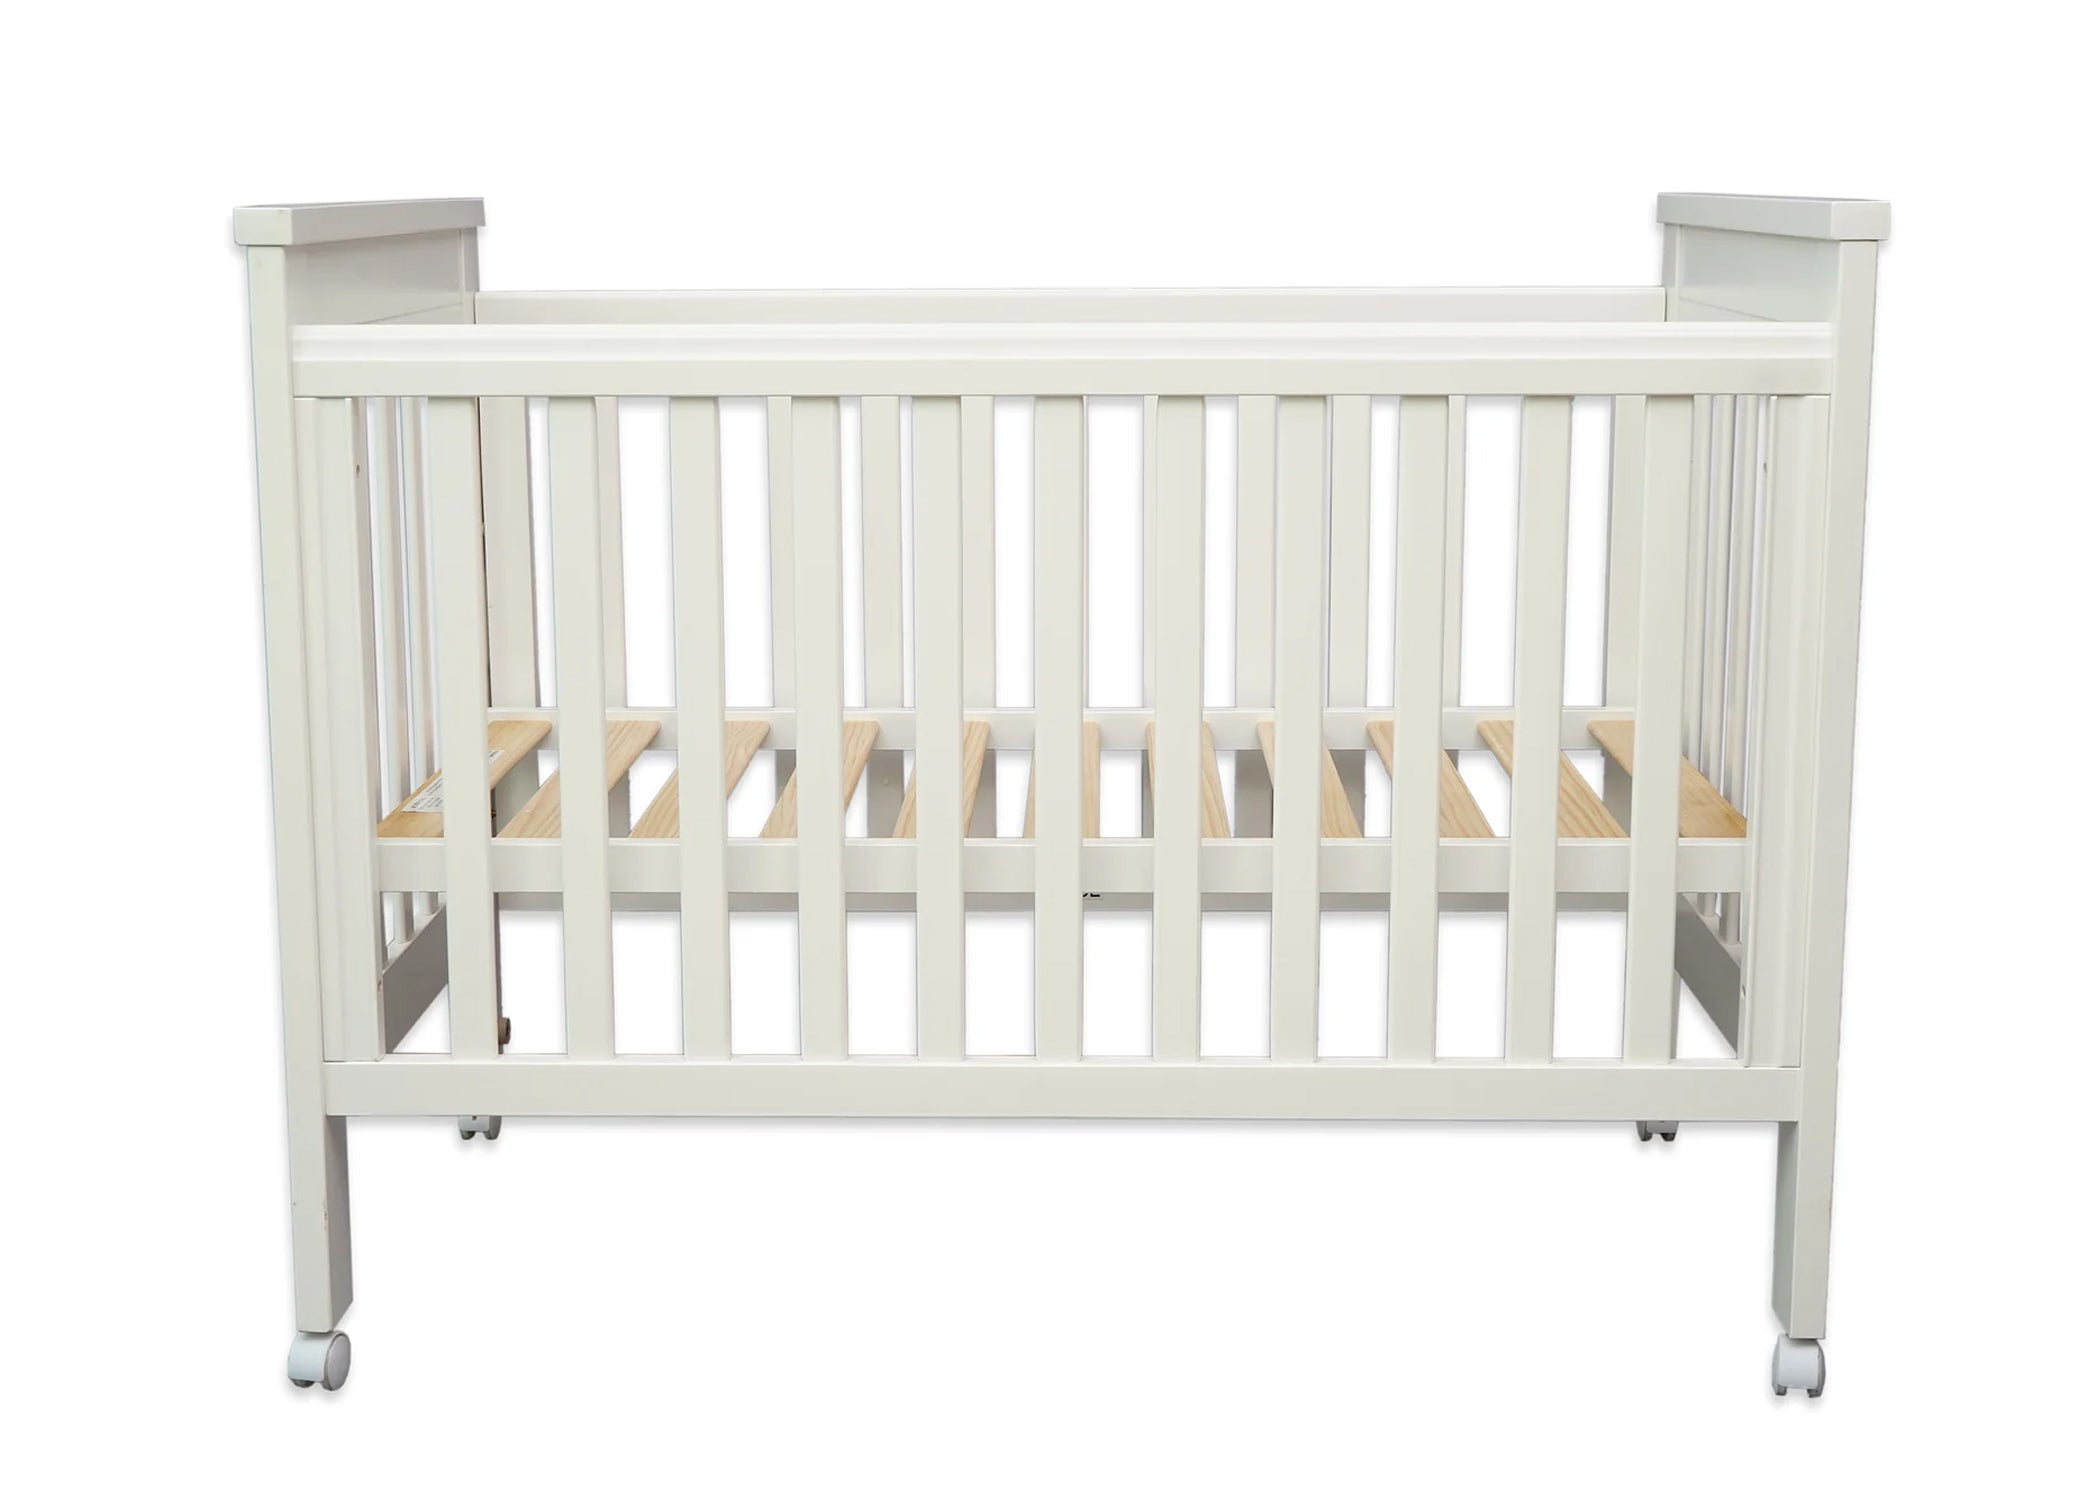 BABY WOODEN COT - BC-2299-2